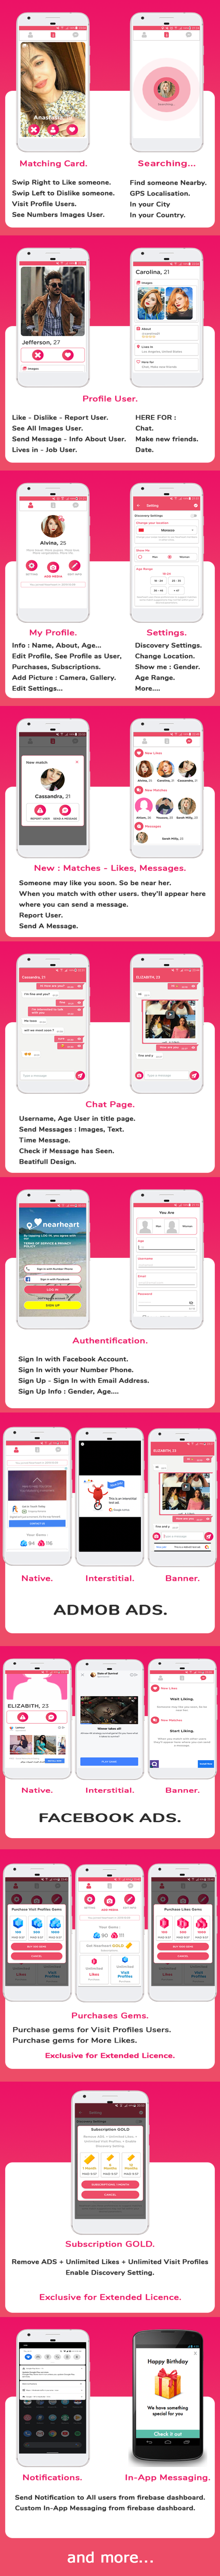 Nearheart - Android Dating App with Facebook & Admob Ads, Subscriptions, Purchases v1.1 - 2